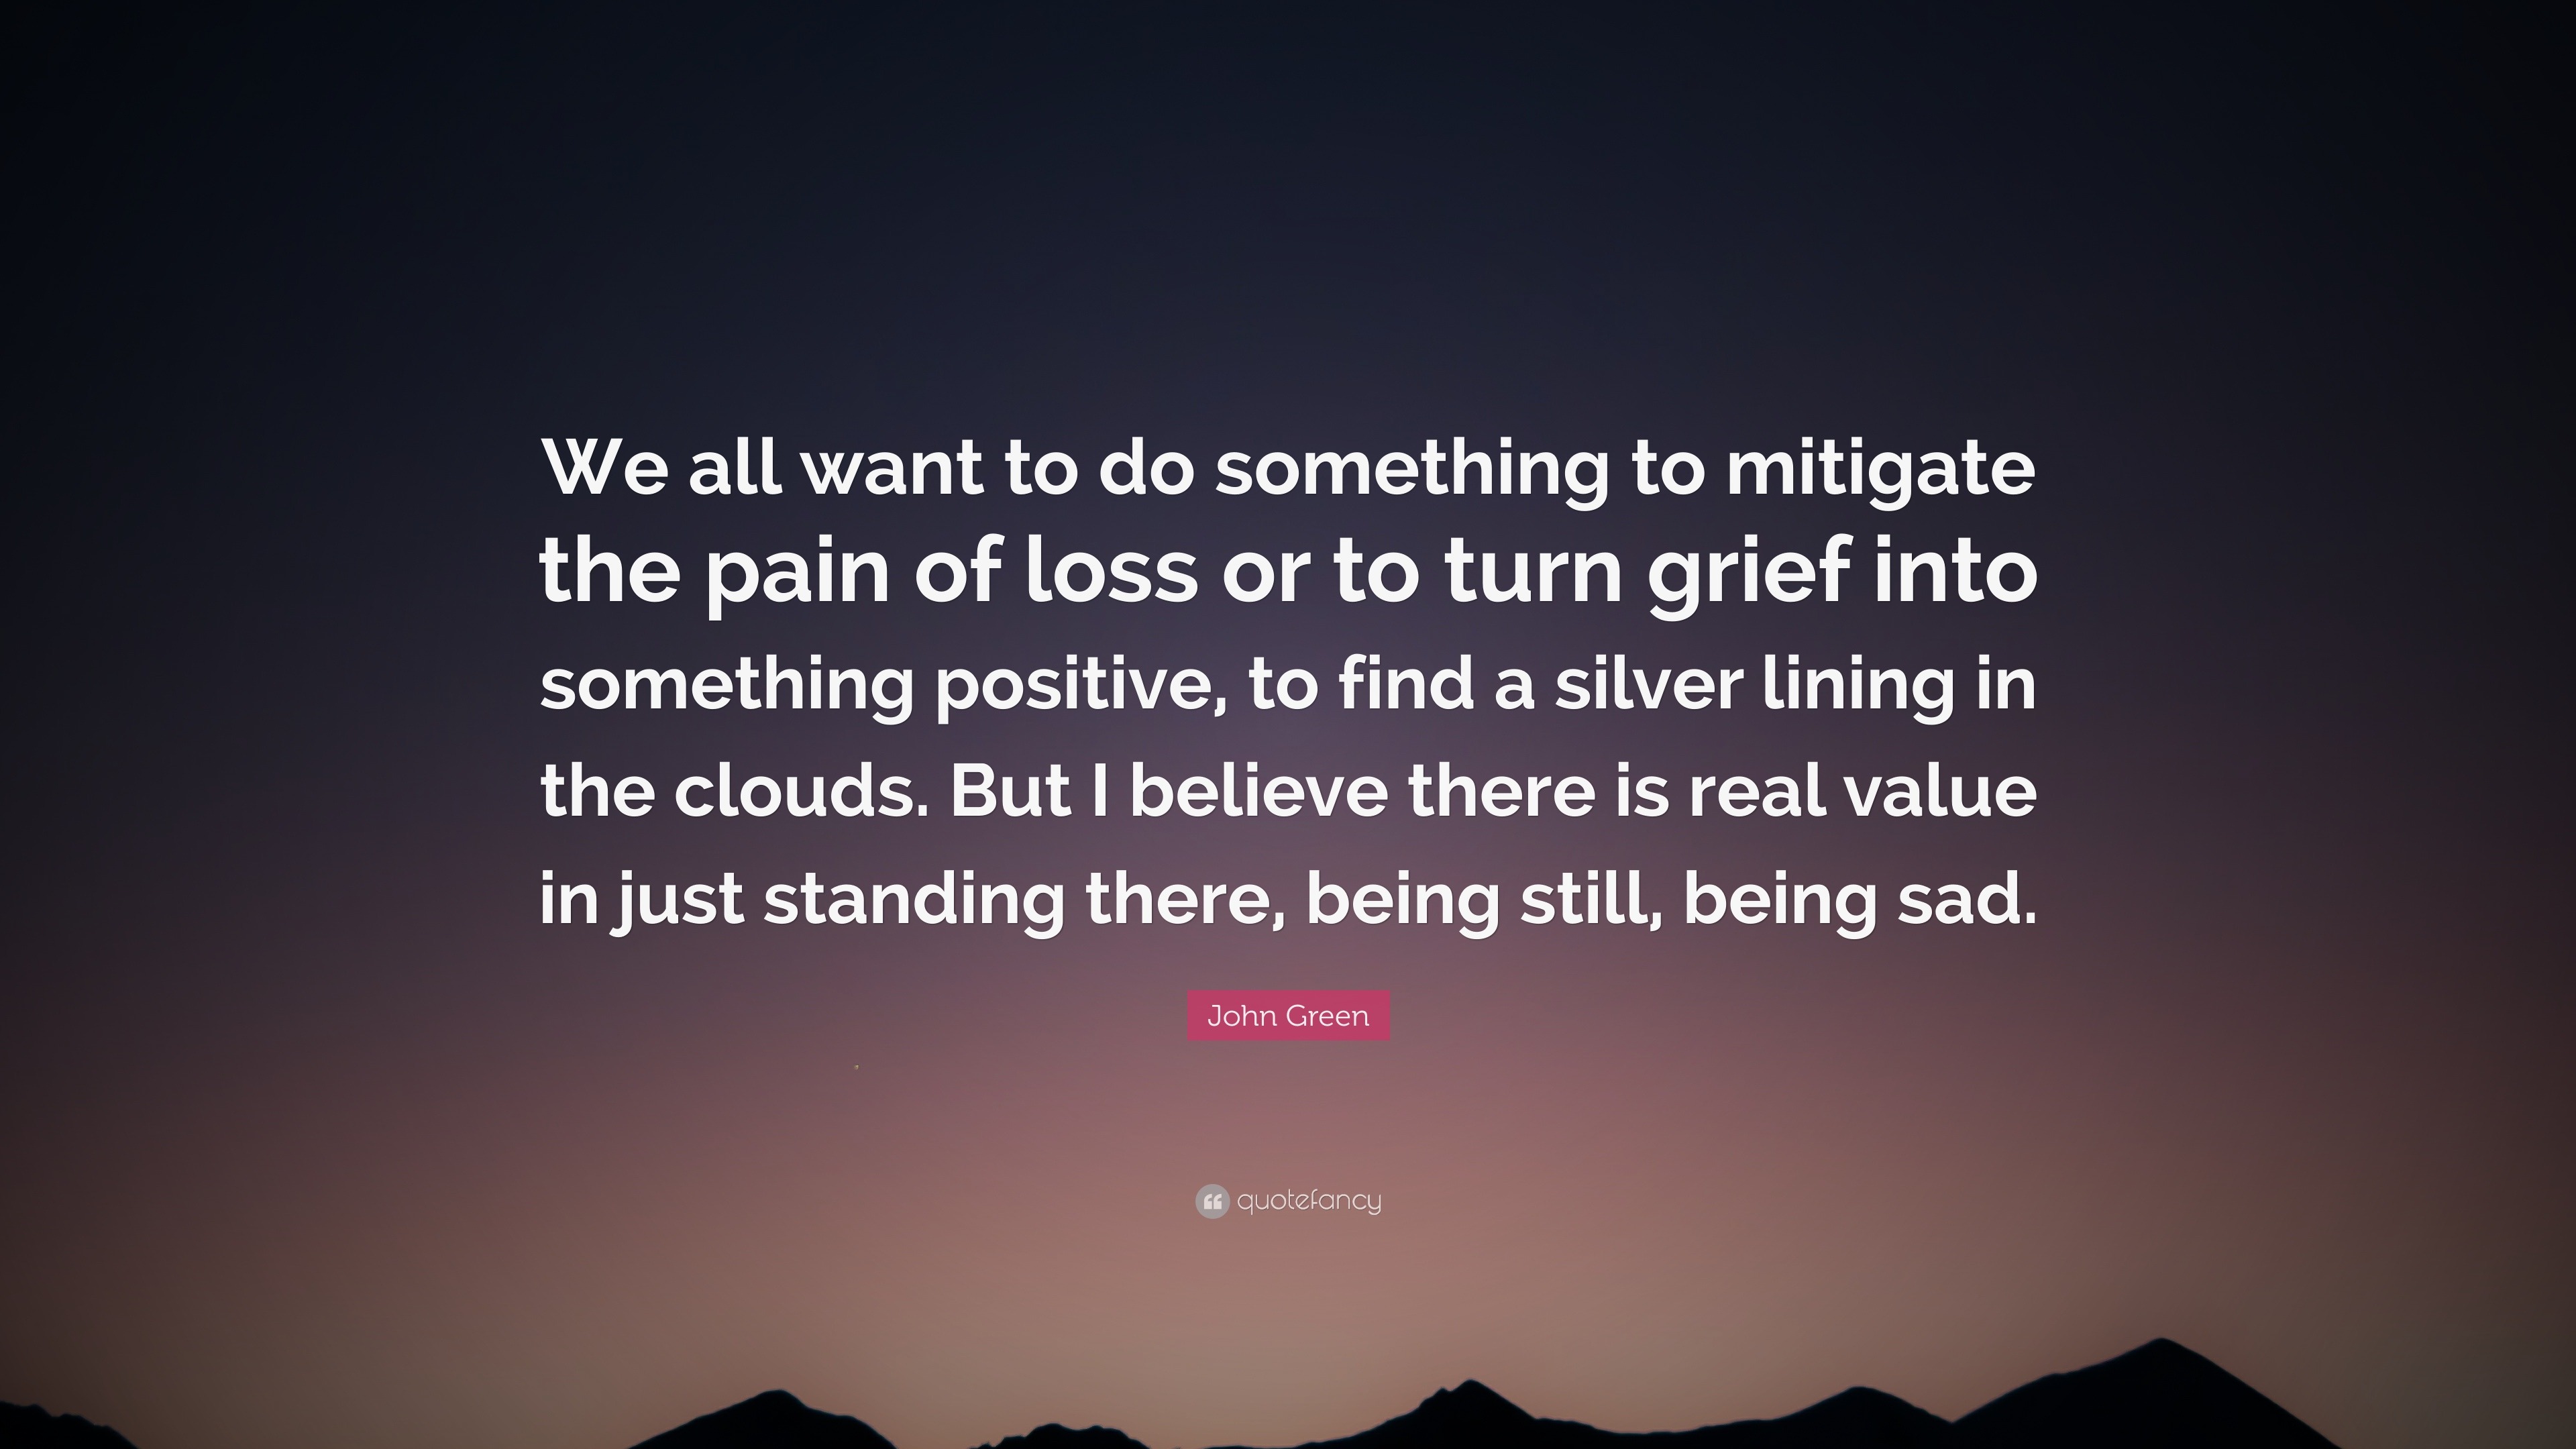 John Green Quote We All Want To Do Something To Mitigate The Pain Of Loss Or To Turn Grief Into Something Positive To Find A Silver Lini 12 Wallpapers Quotefancy